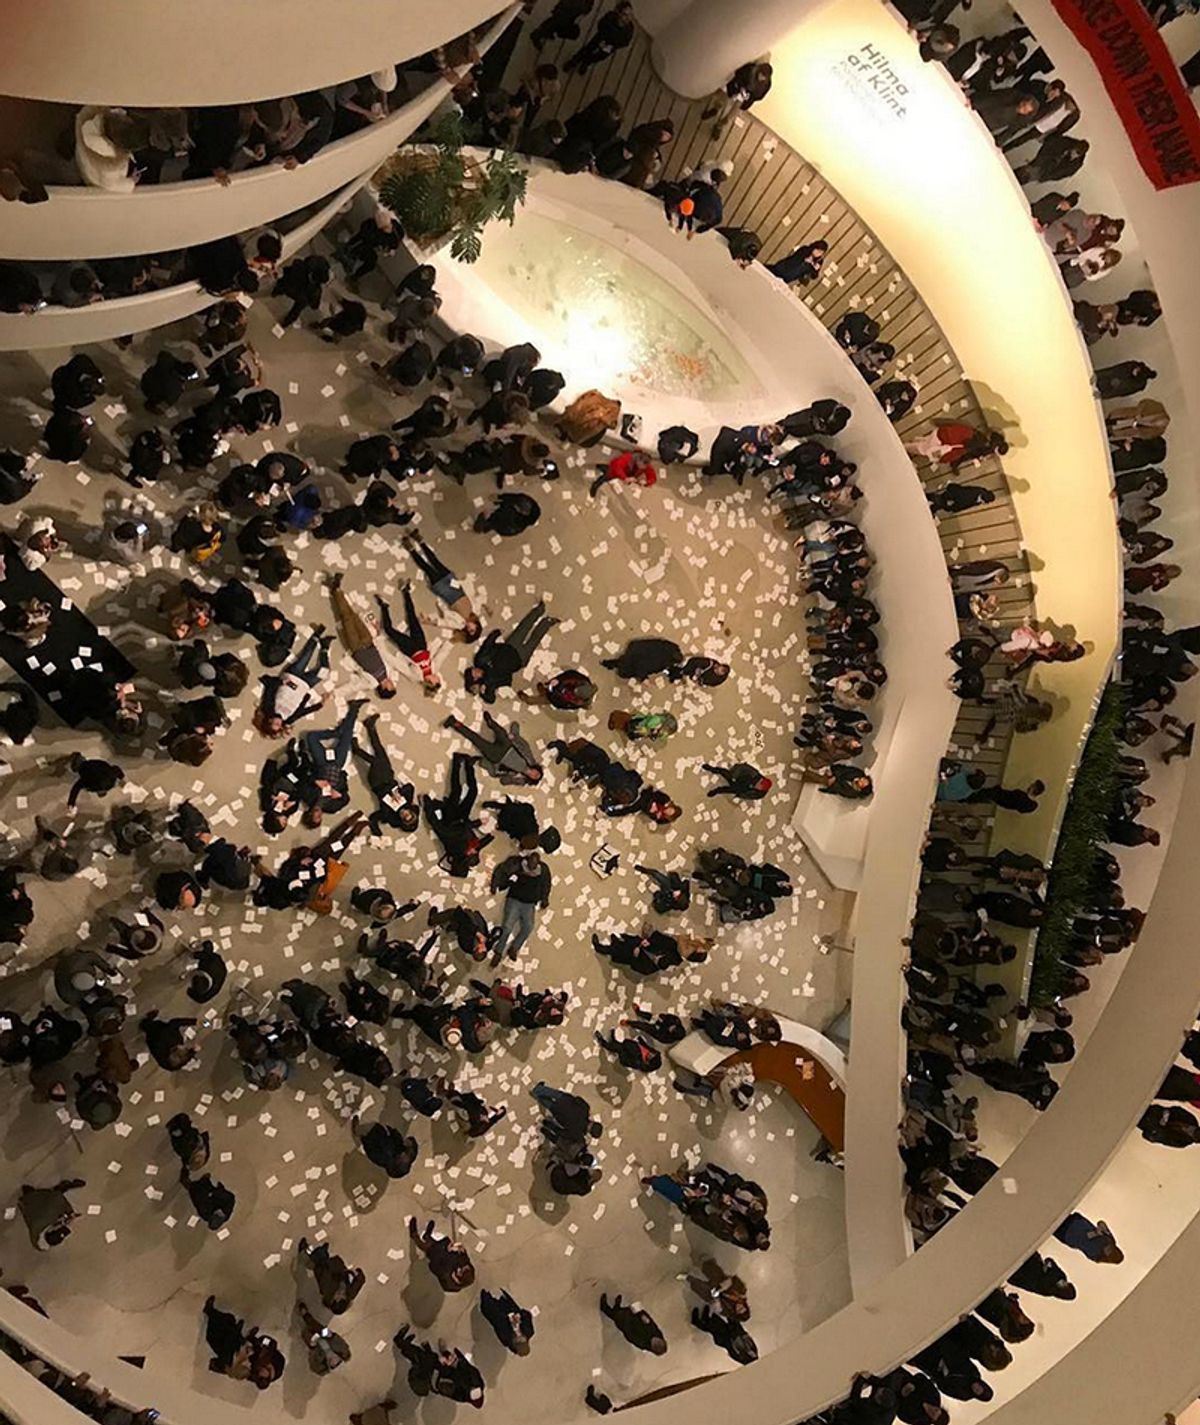 In February, the artist Nan Goldin and her activist group Pain (Prescription Addiction Intervention Now) held protests inside the Guggenheim Museum over Sackler sponsorship Photo: @sacklerpain/instagram